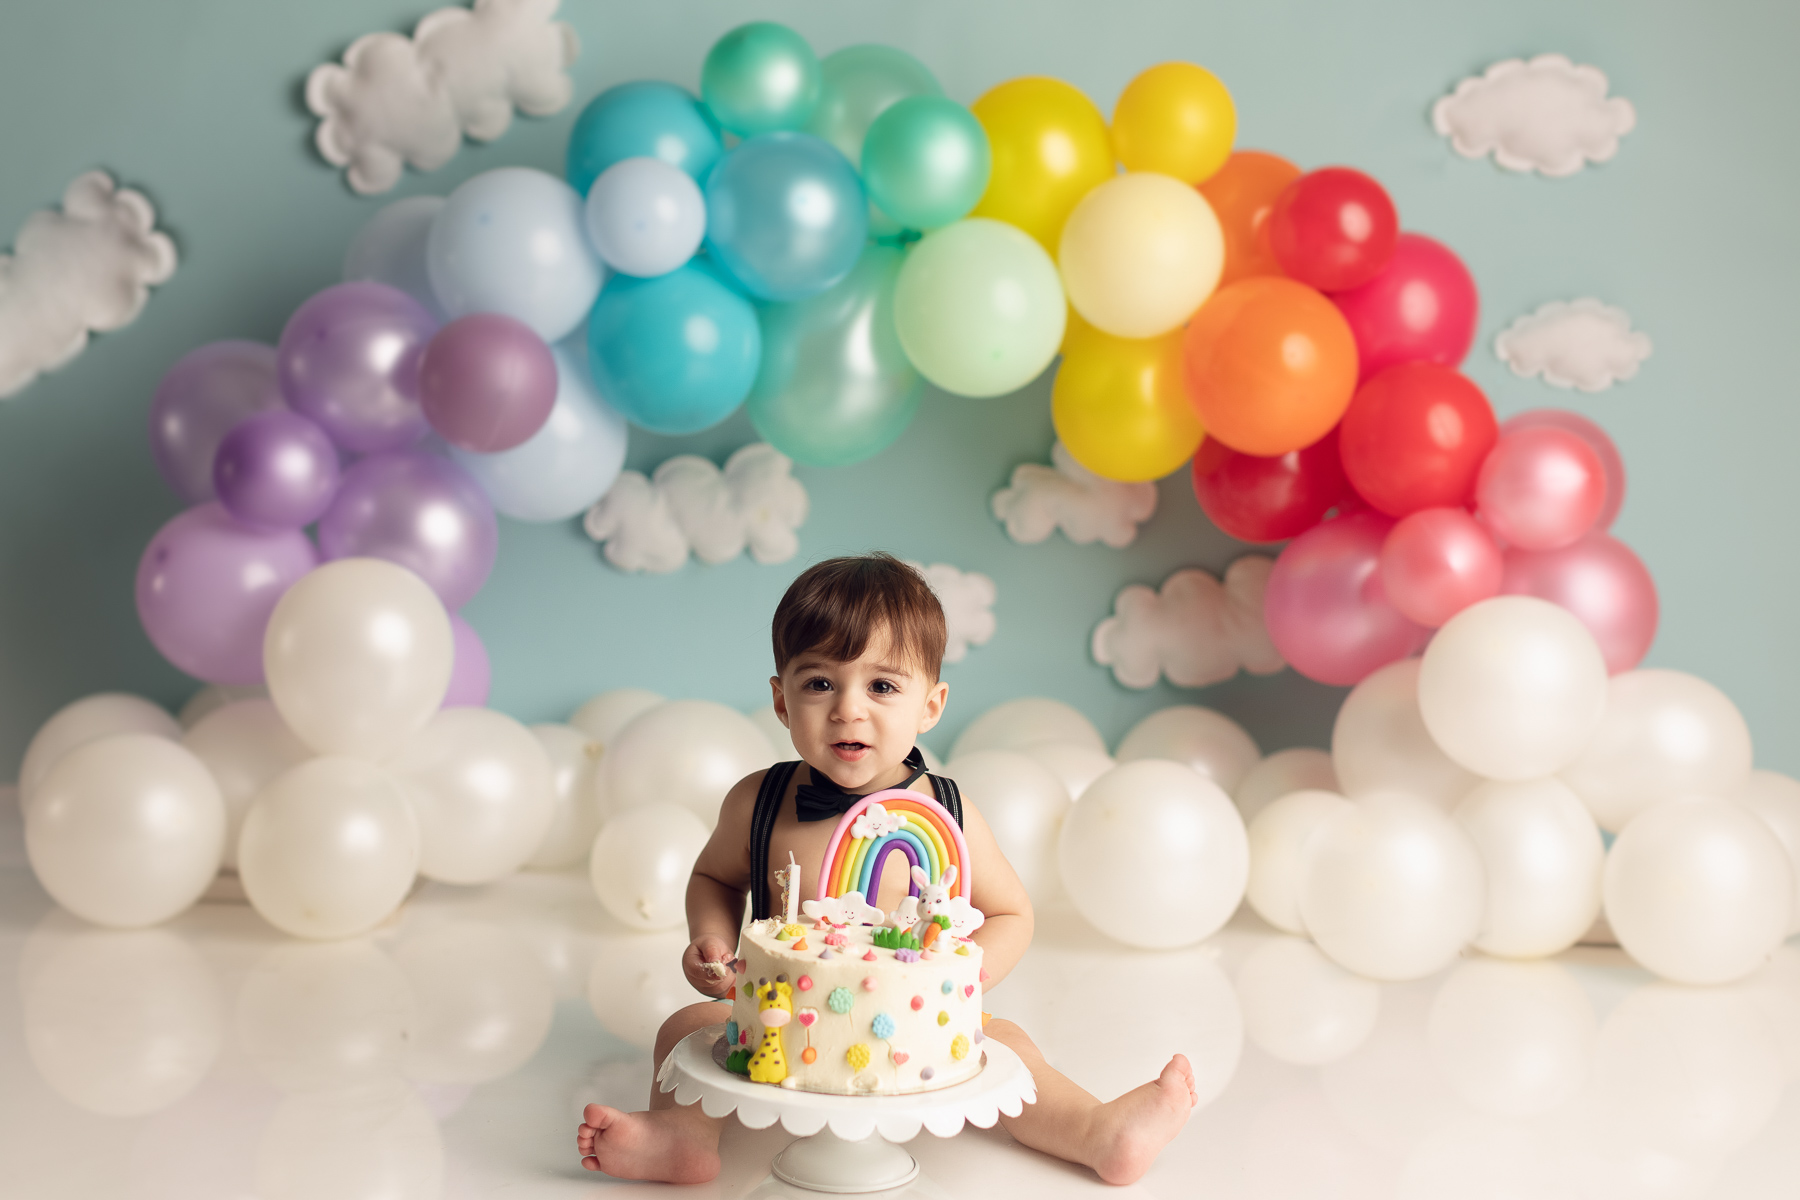  Rainbow color balloons and cake smash  - Baby photographer lower mainland